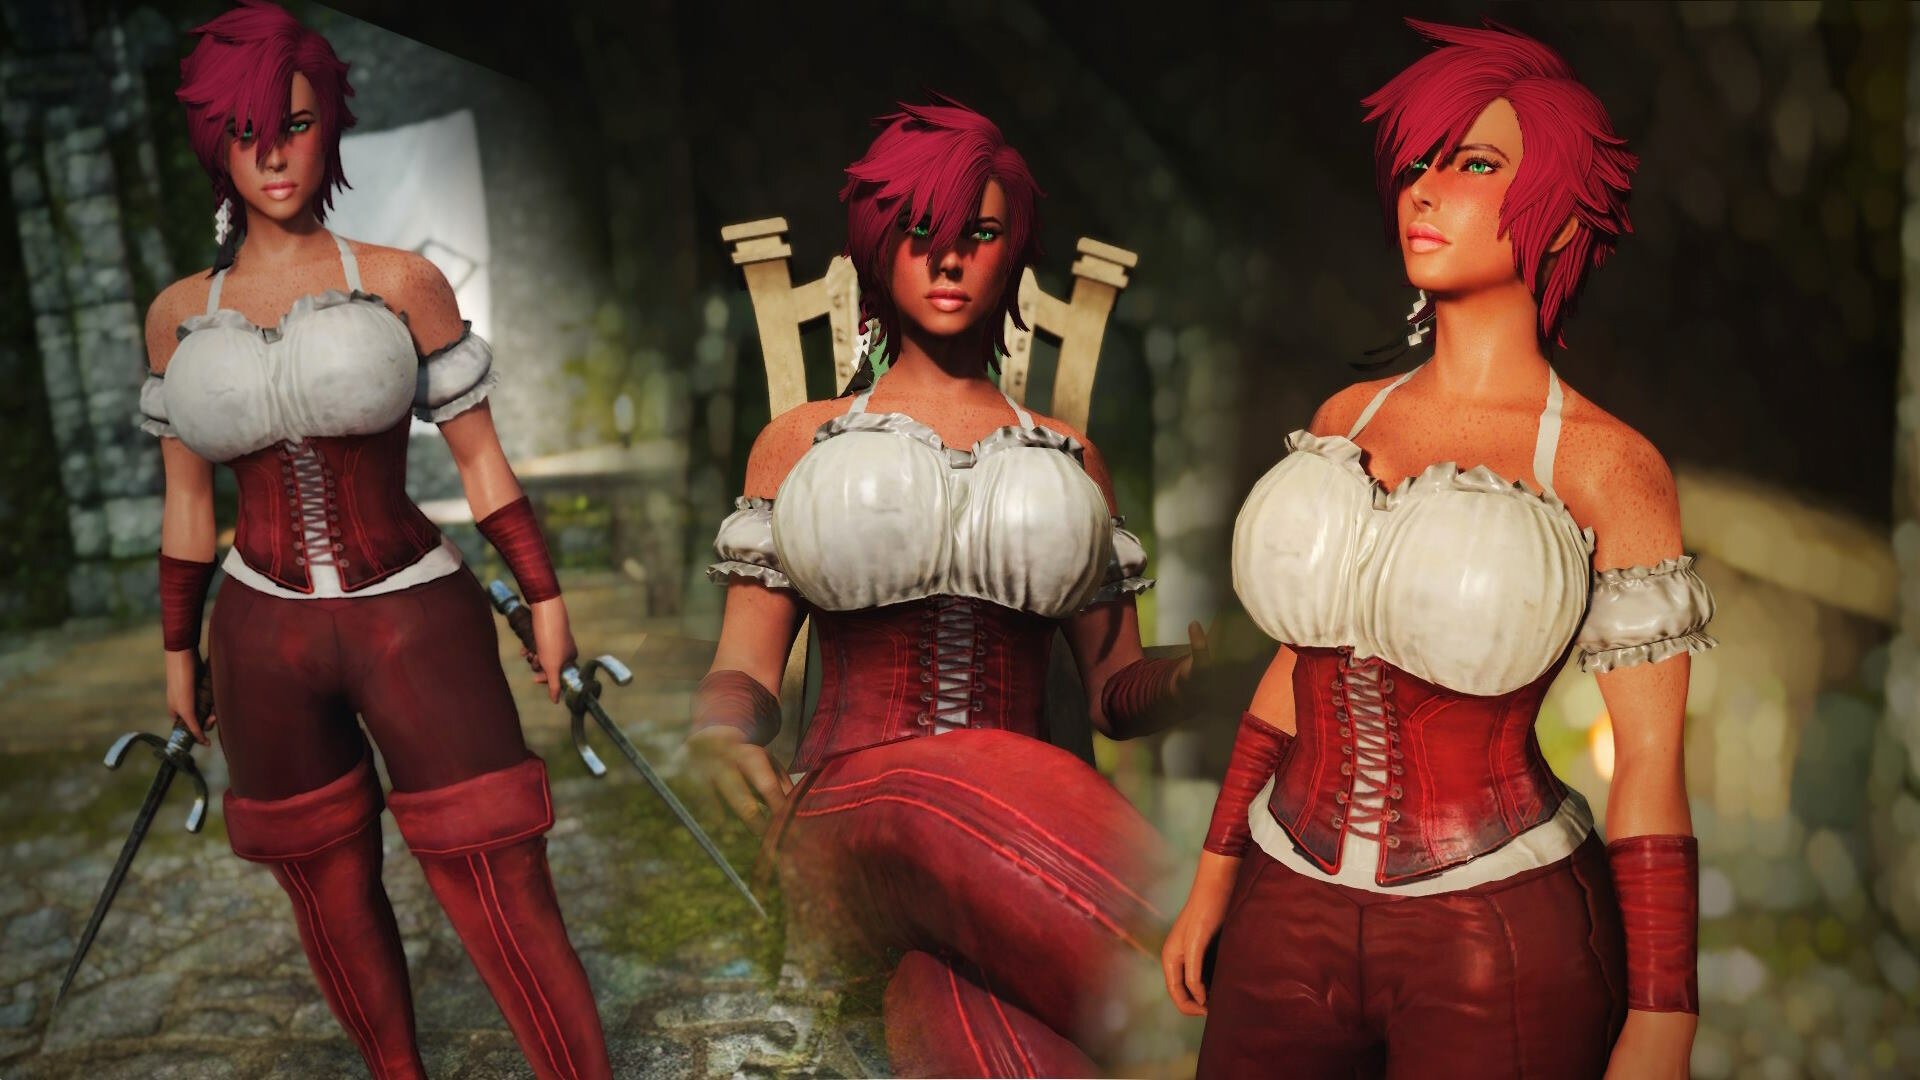 Corseted Riding Outfit BHUNP-3BA + 2 Weapons